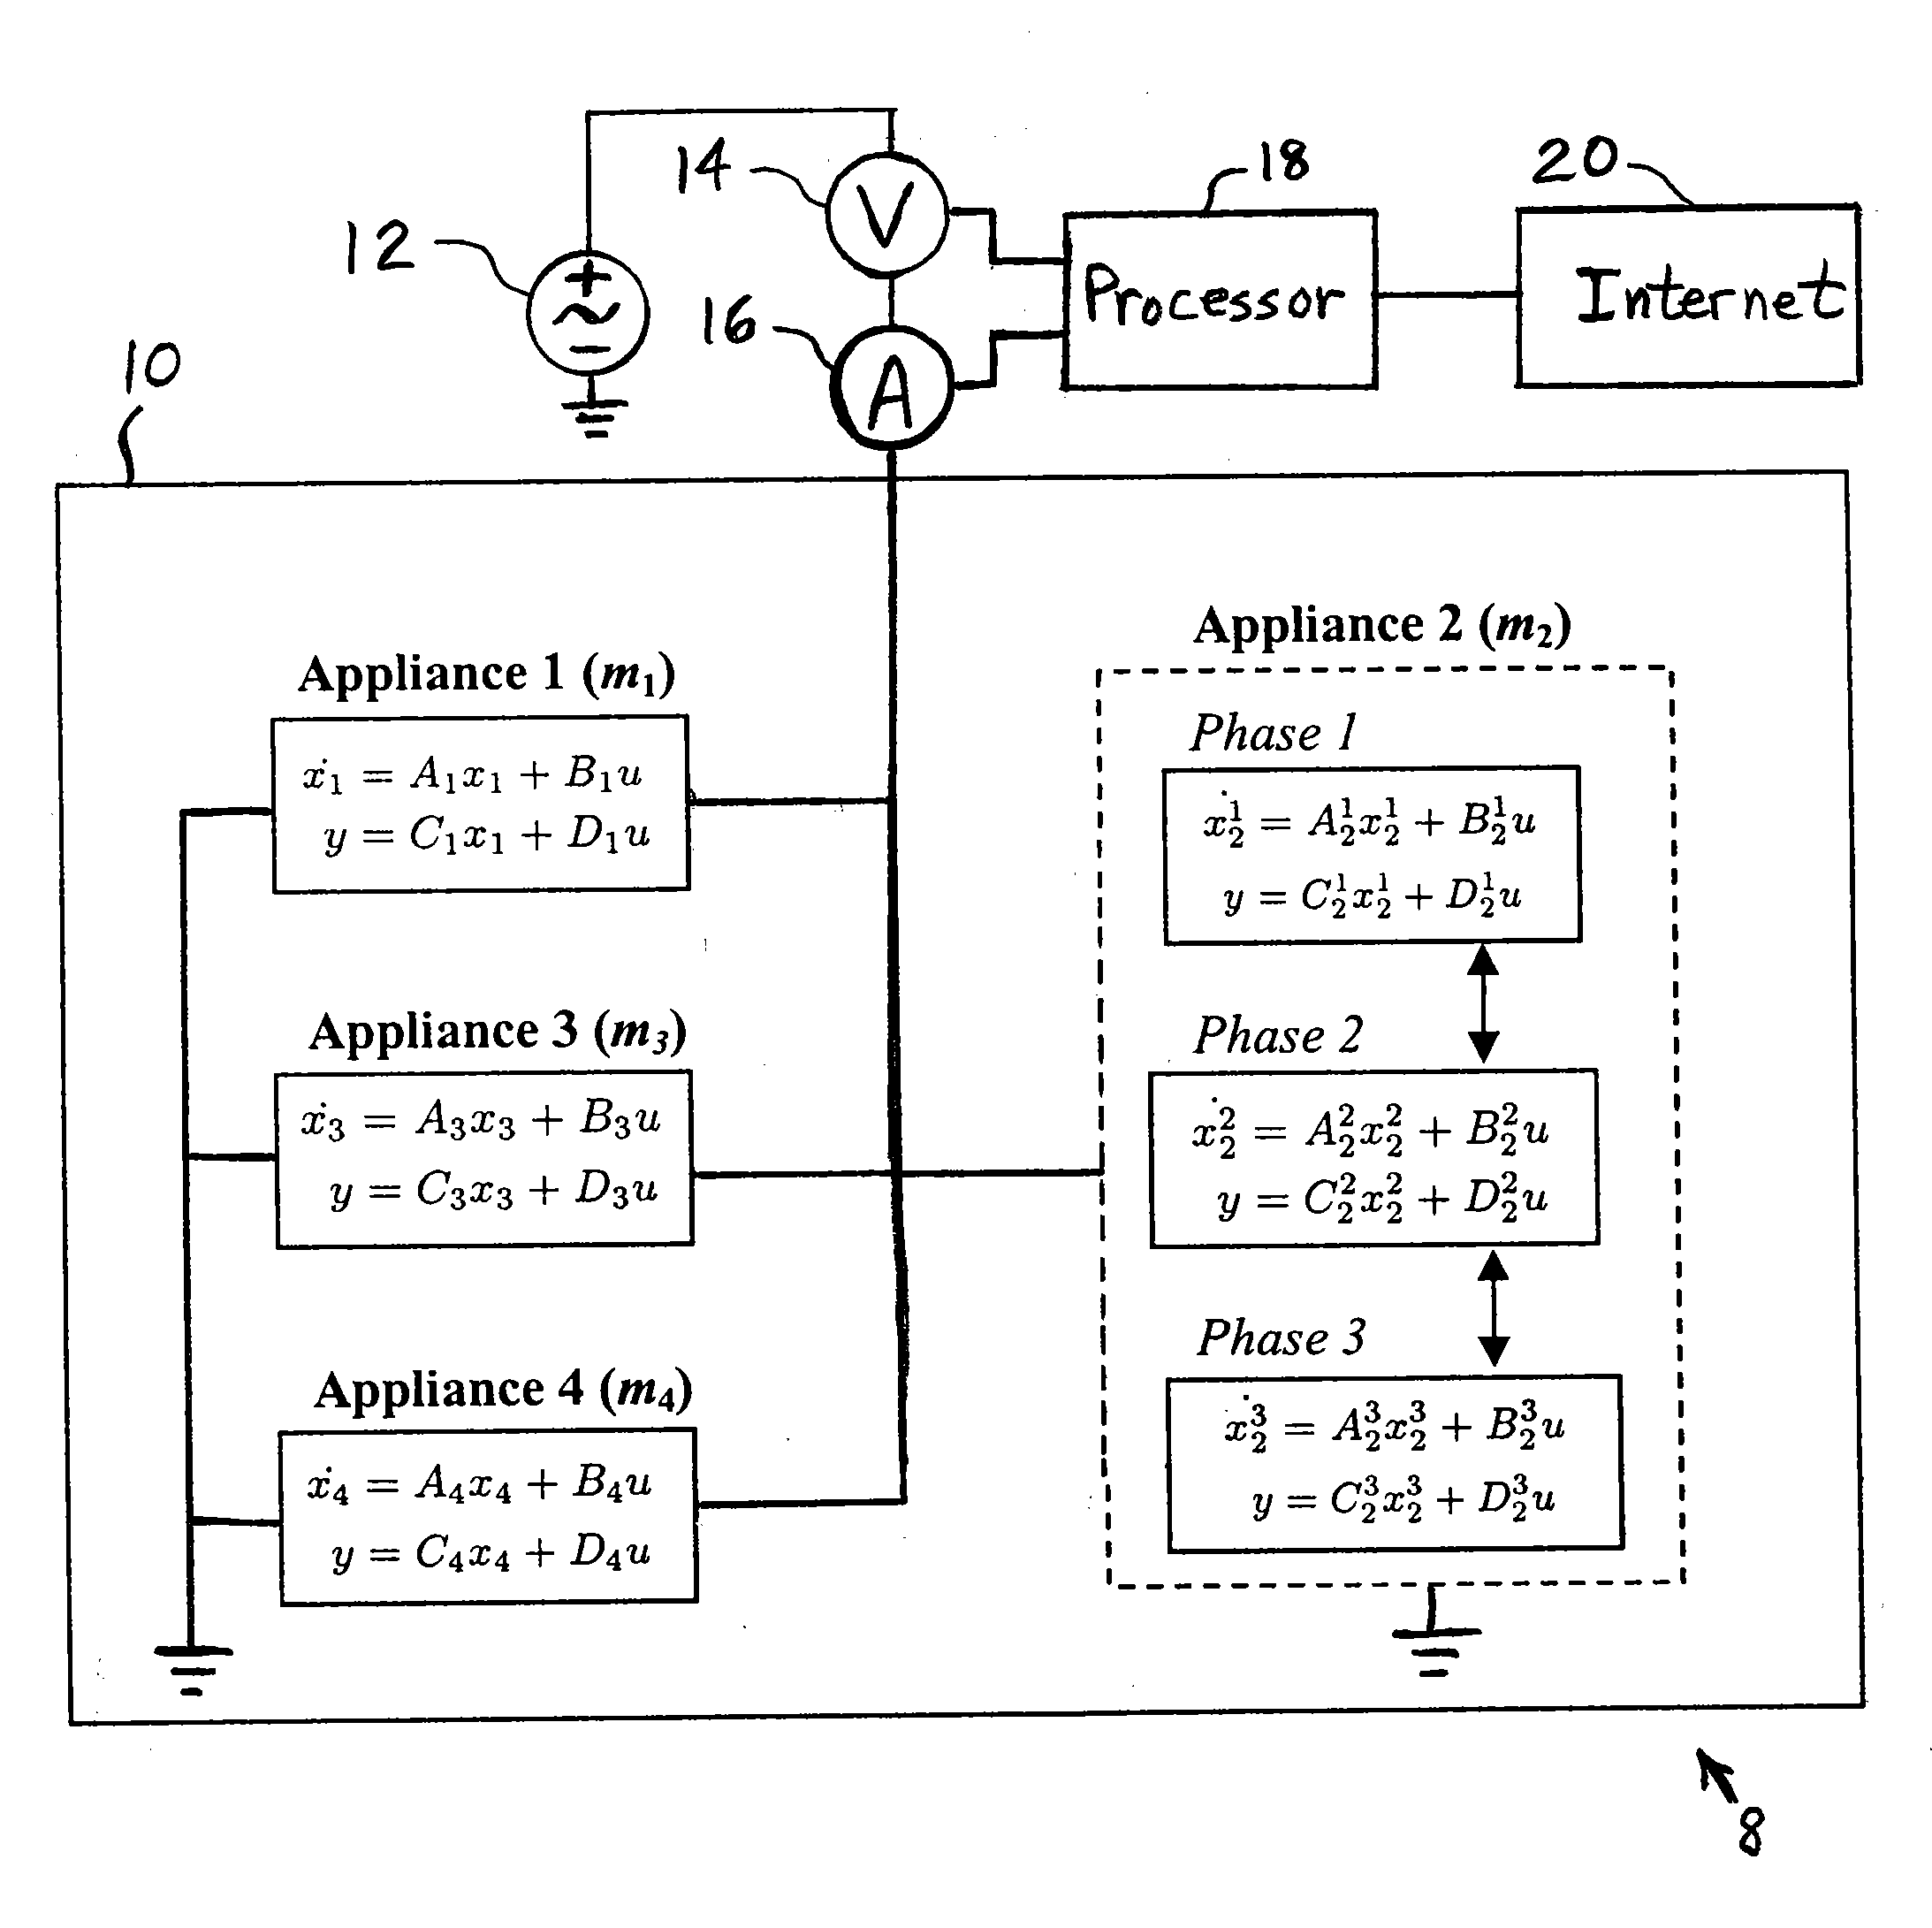 Method for non-intrusive load monitoring using a hybrid systems state estimation approach